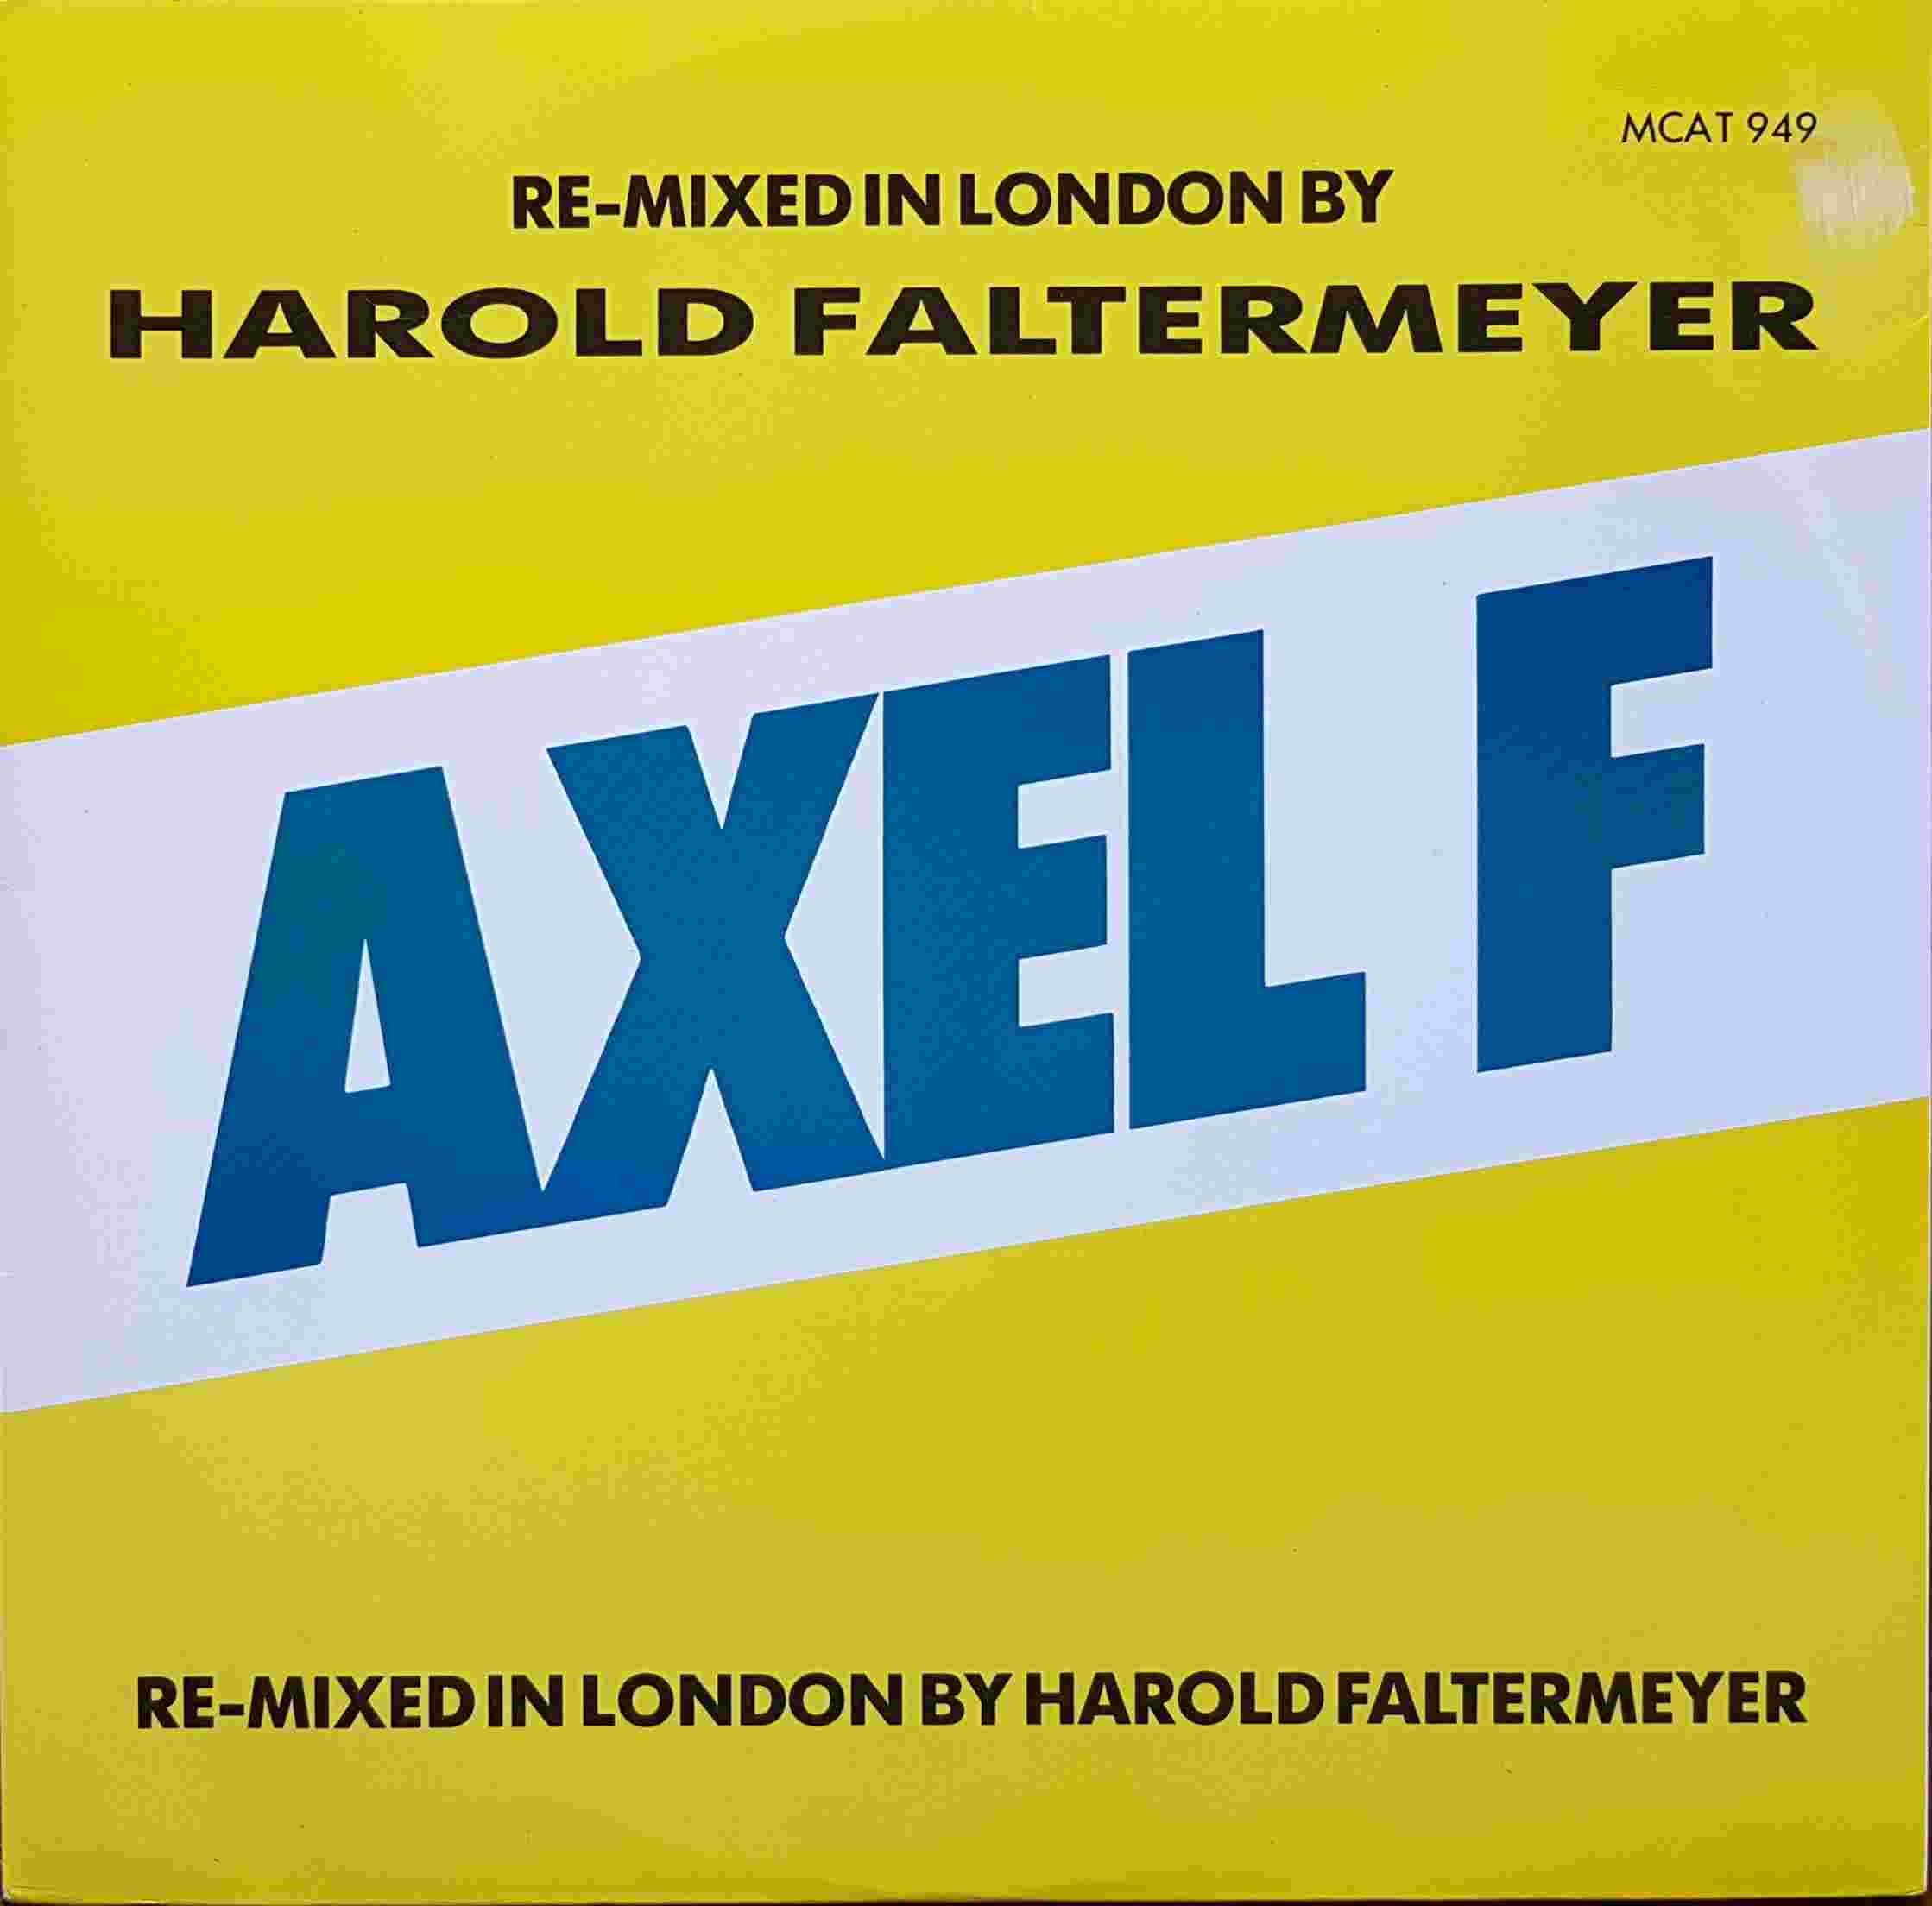 Picture of Axel F by artist Harold Faltermeyer from ITV, Channel 4 and Channel 5 12inches library